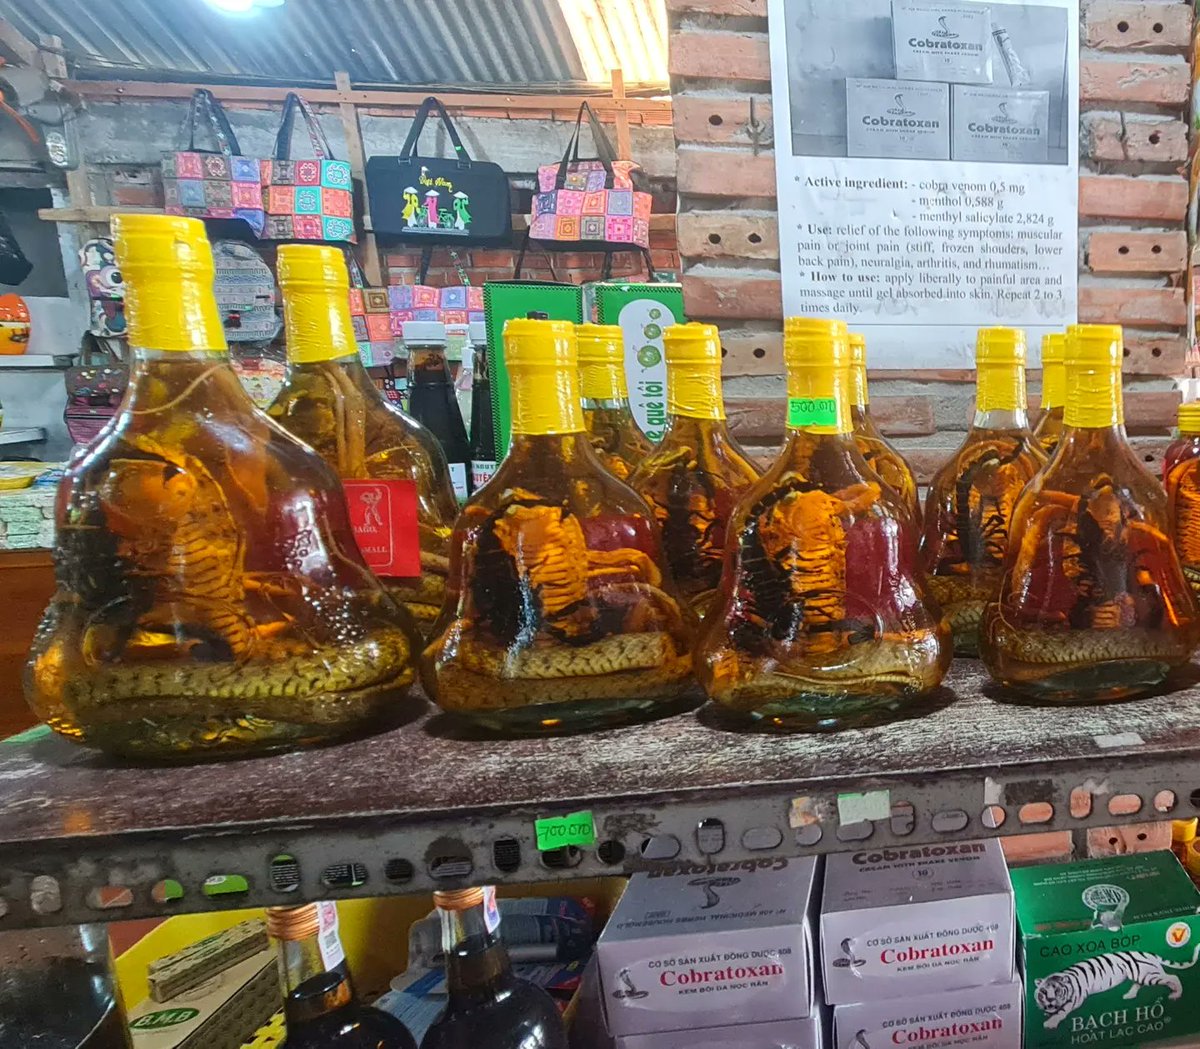 Would you try Cobra Snake Rice Wine? Or would you prefer the Jack Fruit or Banana Wine? In Vietnam, there was also Cobratoxen for sale. A gel that has 0,5mgs of Cobra Venom, which apparently is very good for muscular, rheumatic pain, neuralgia, arthrits, and joint pain. Just…